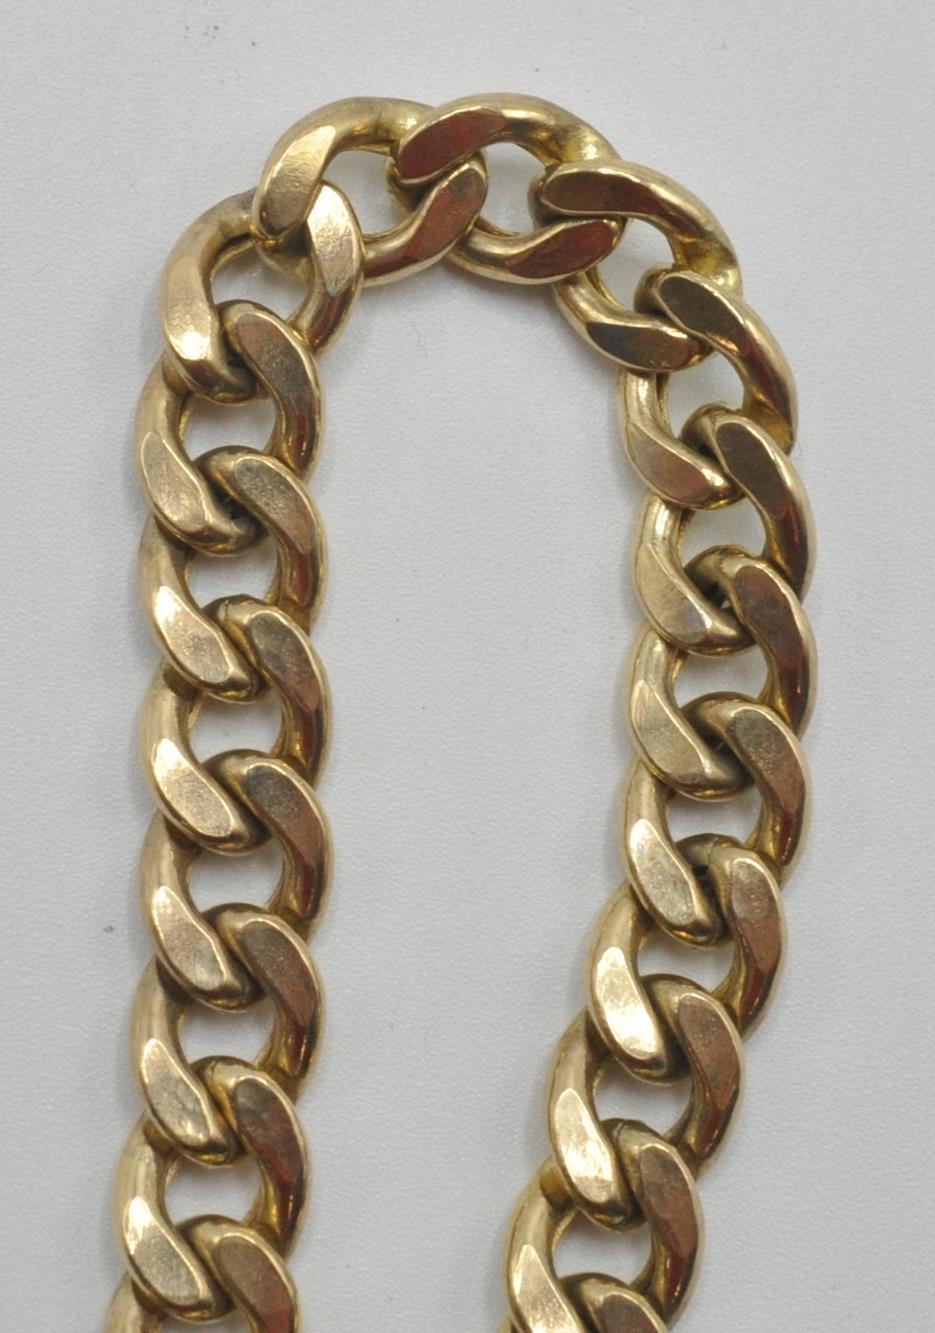 9CT YELLOW GOLD FLAT LINK BRACELET WITH A PADLOCK CLASP - Image 2 of 5